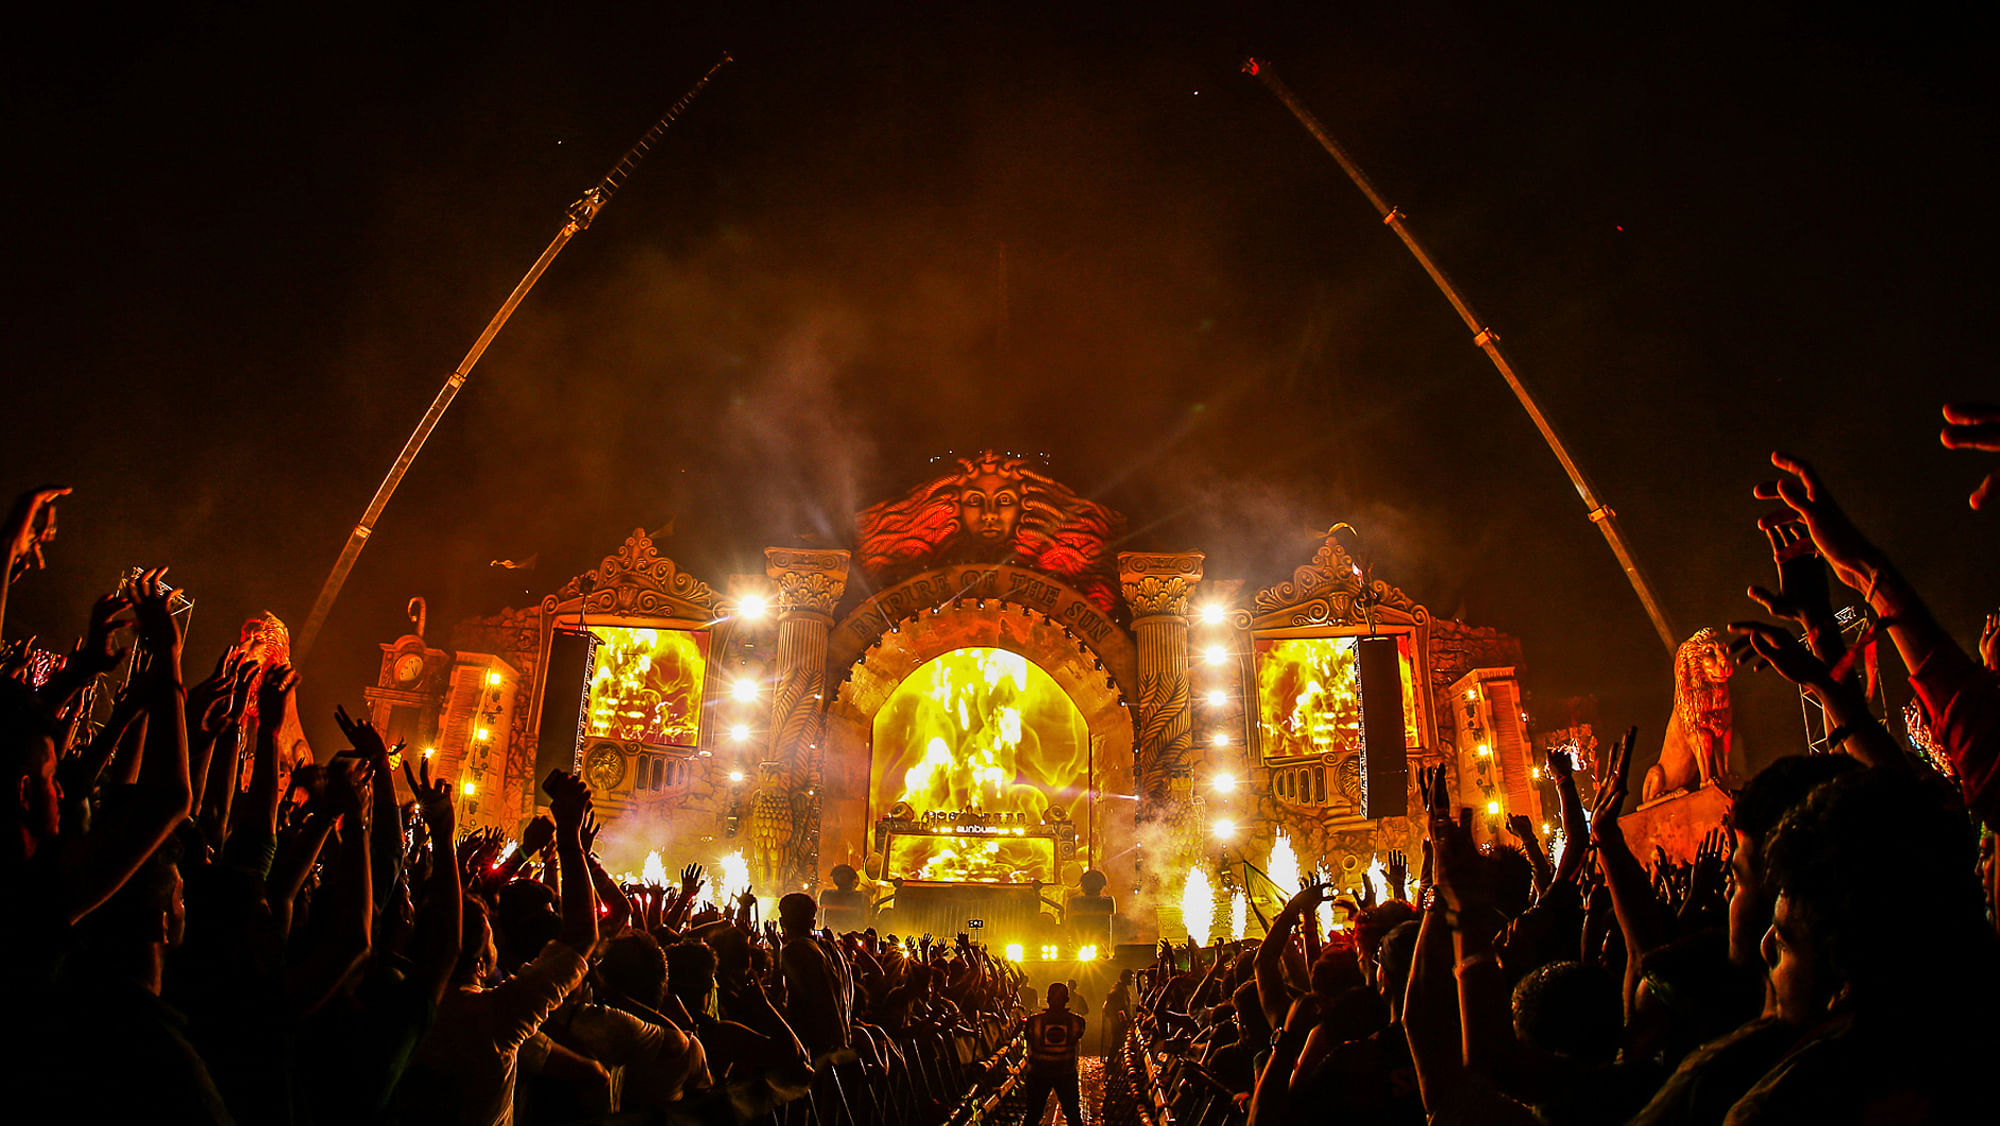 The Sunburn festival in Goa is one its biggest attractions. (Photo Courtesy: <a href="https://www.facebook.com/SunburnFestival/photos_stream">Facebook/Sunburn</a>)